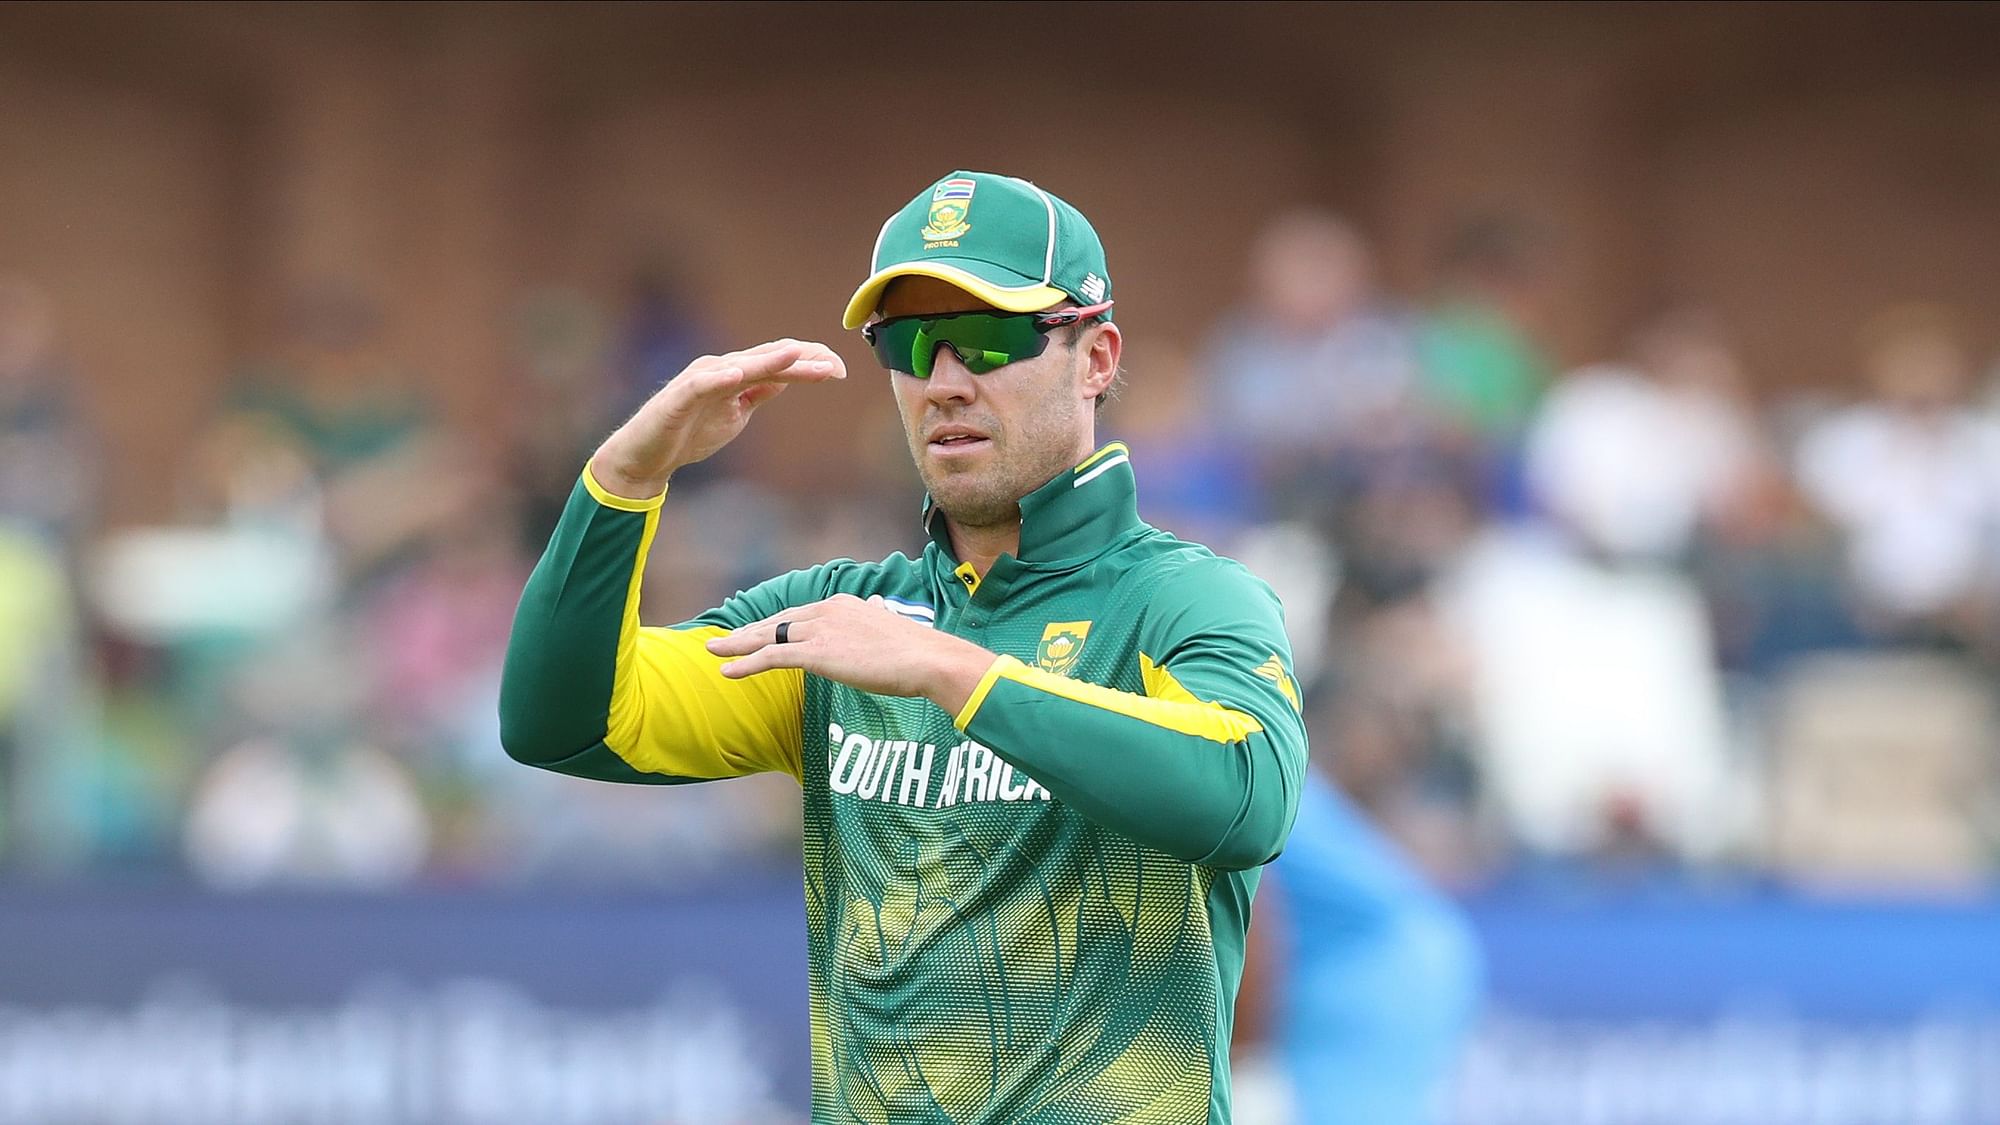 Cricket South Africa has asked AB de Villiers “to lead the national side once again”.